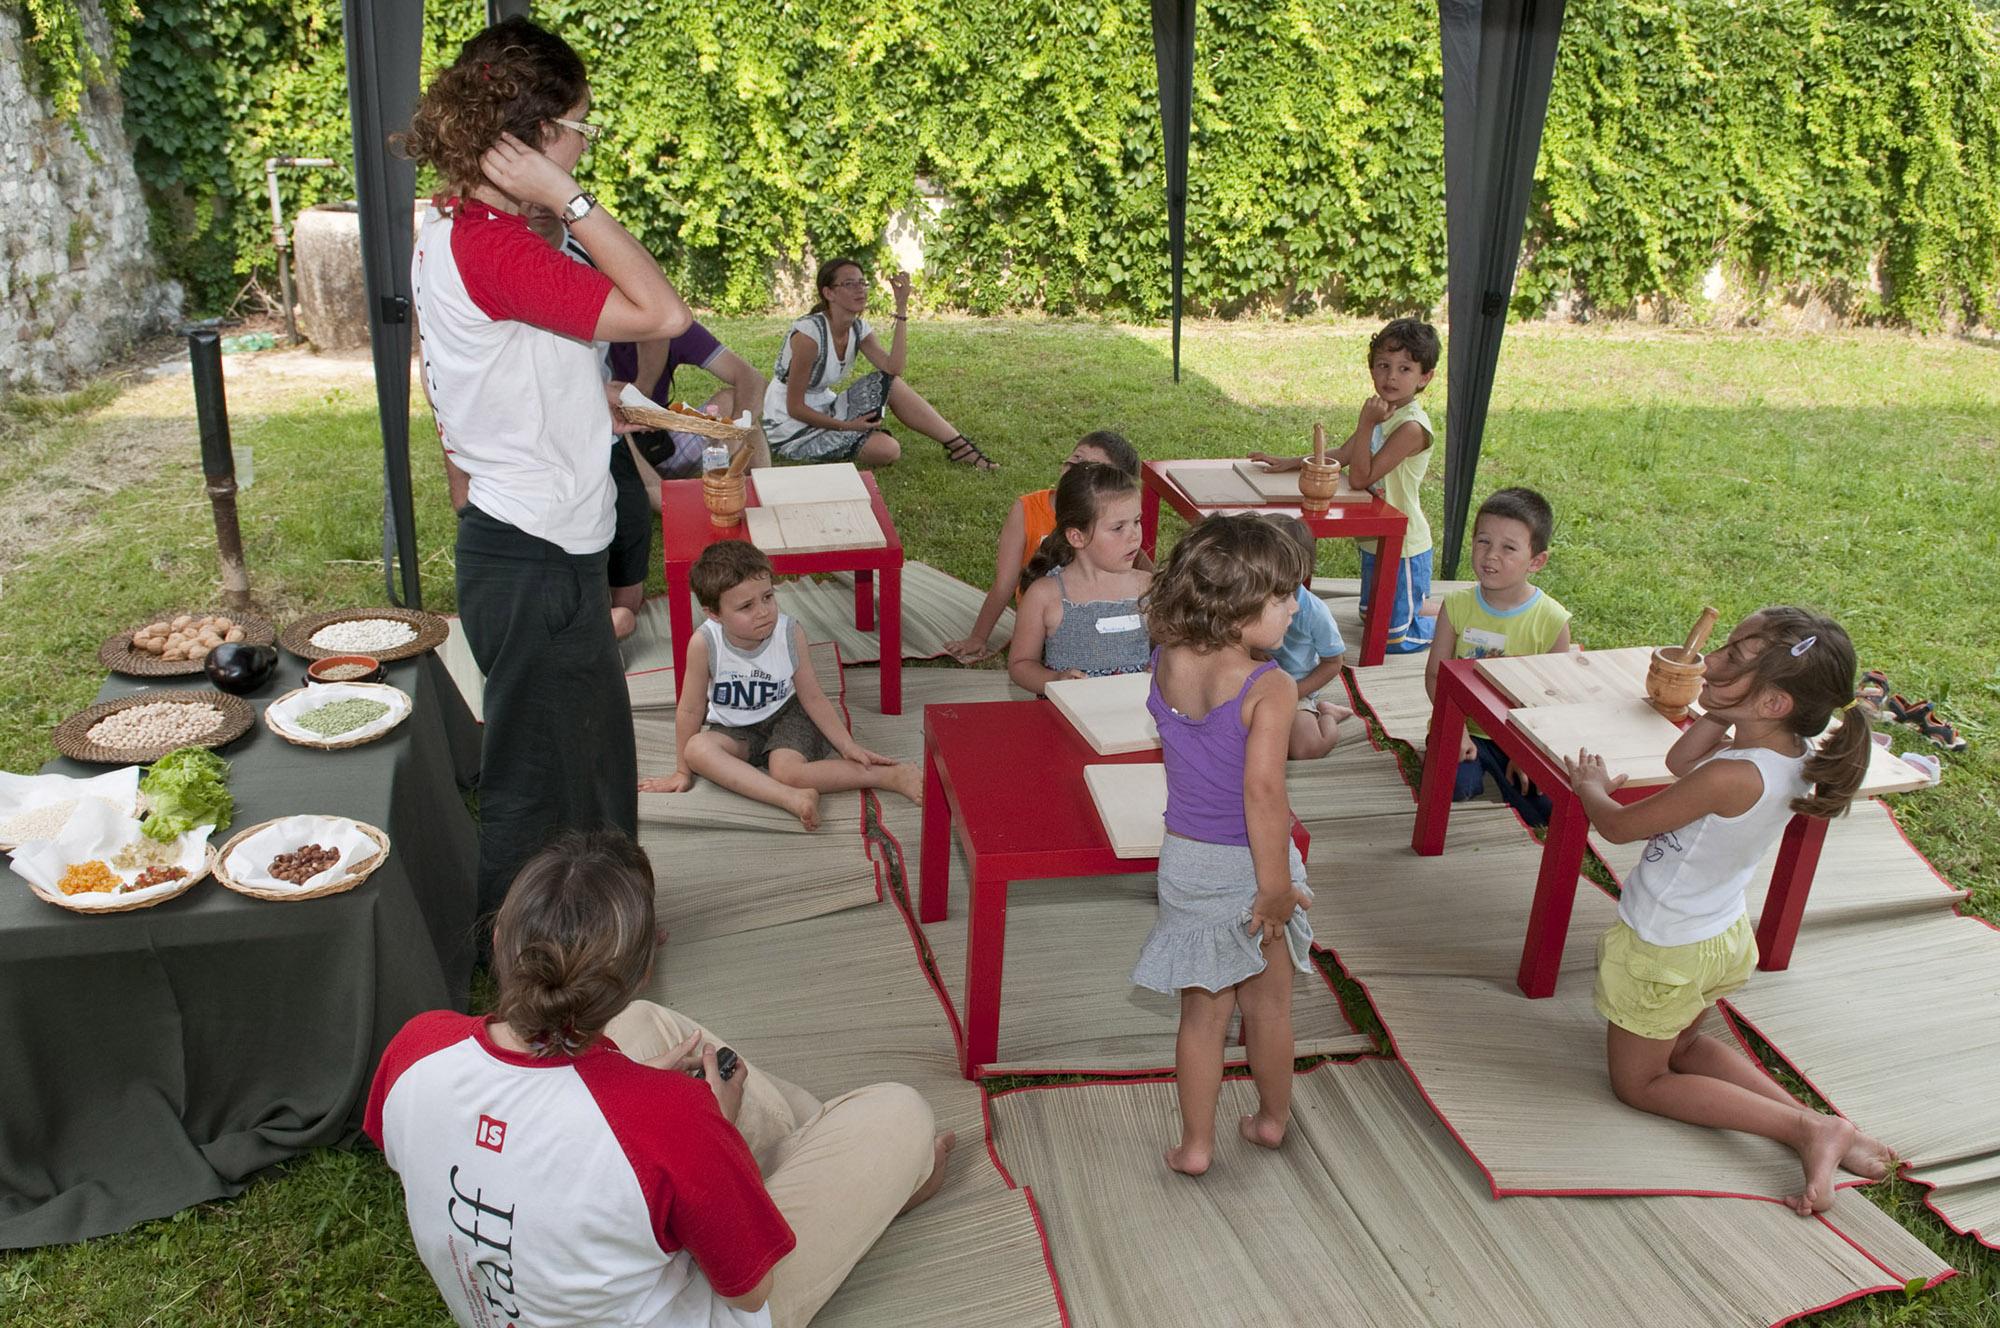 Aquileia Lab hosts educational and leisure workshops focused on the world of the ancient Romans. – © Gianluca Baronchelli